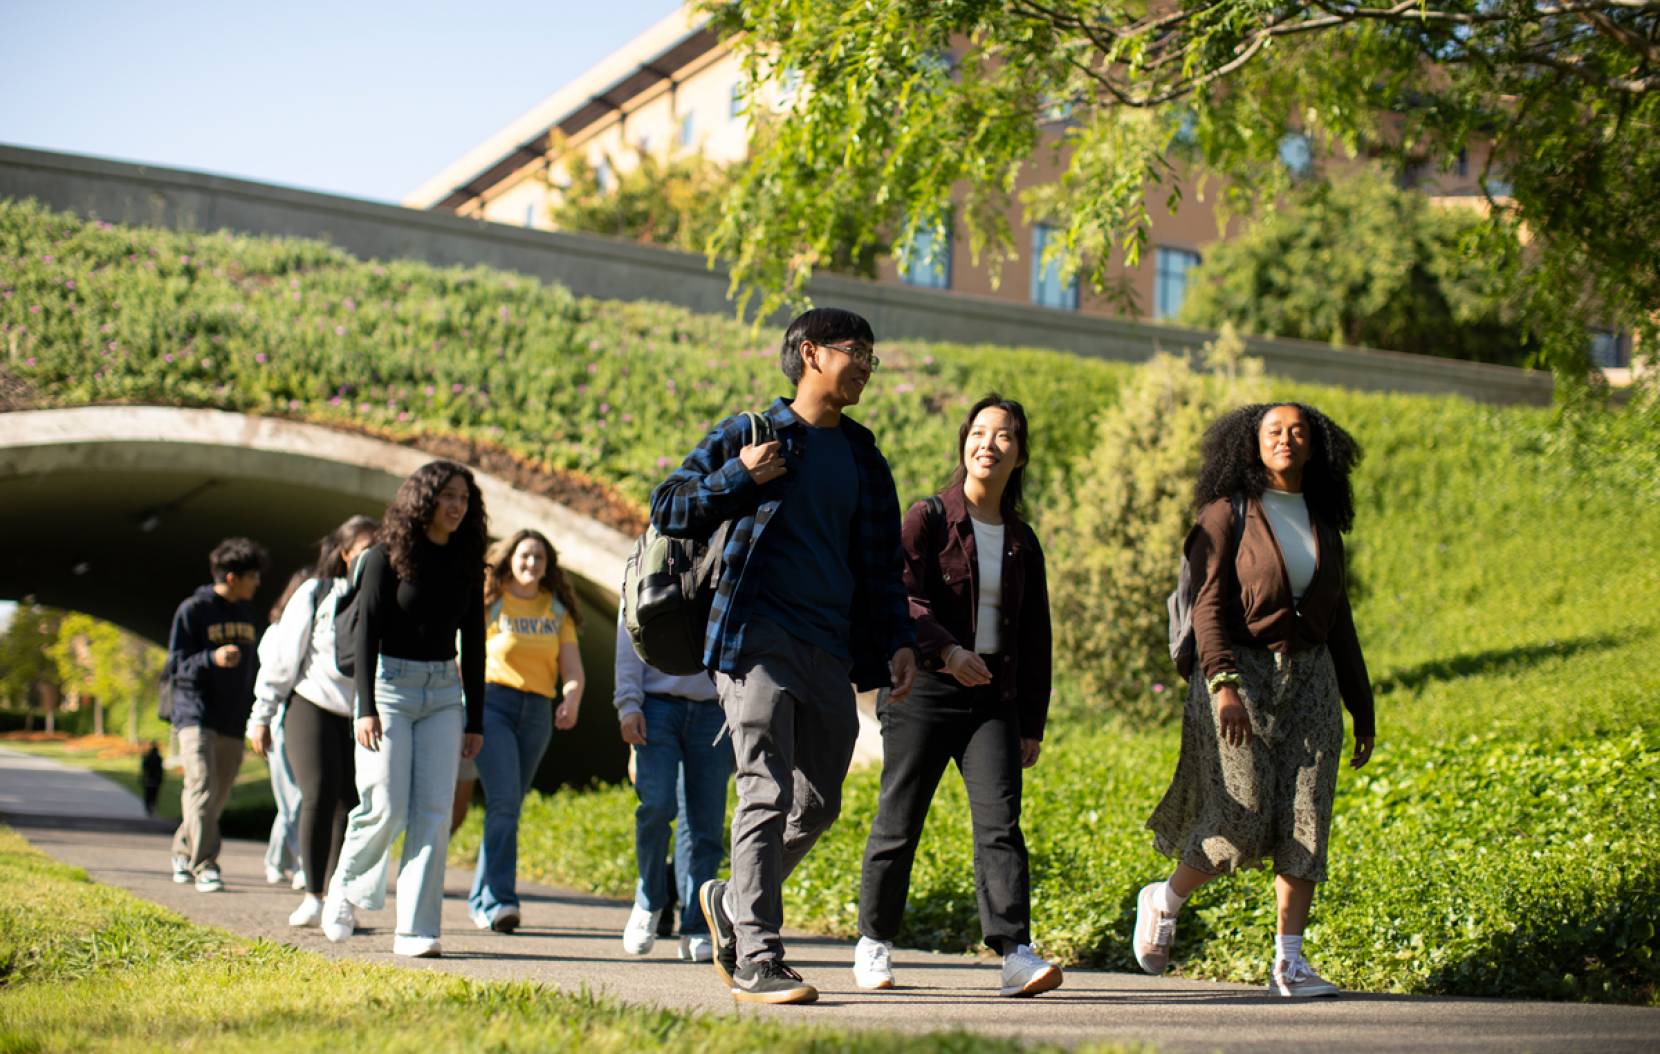 A diverse group of undergrads walks on a path emerging from a tunnel